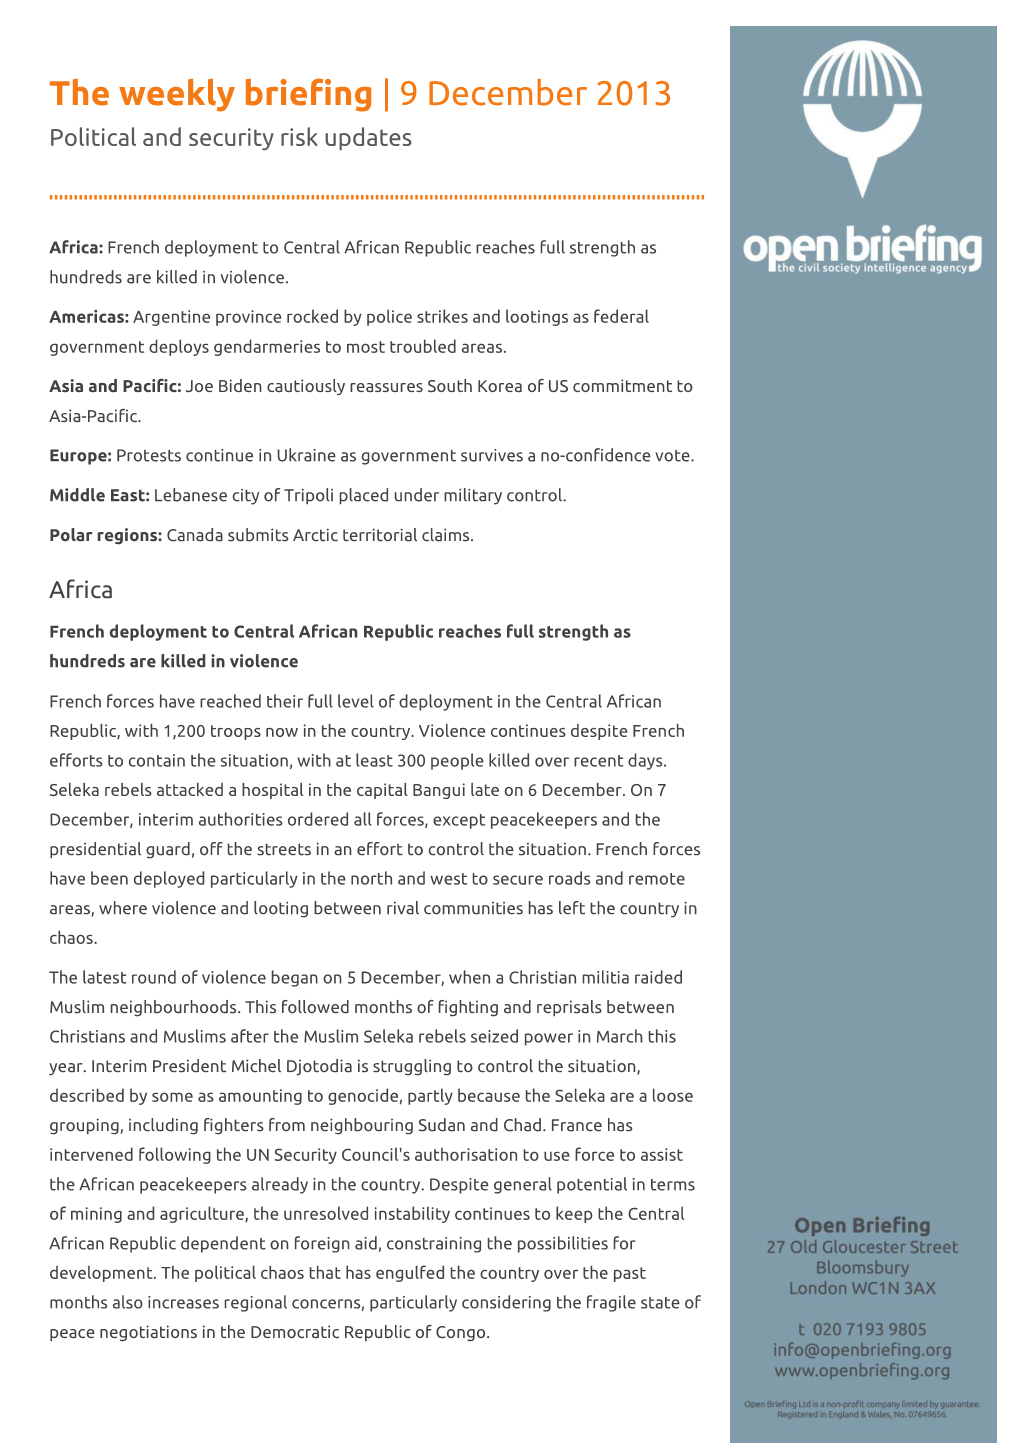 The Weekly Briefing | 9 December 2013 Political and Security Risk Updates